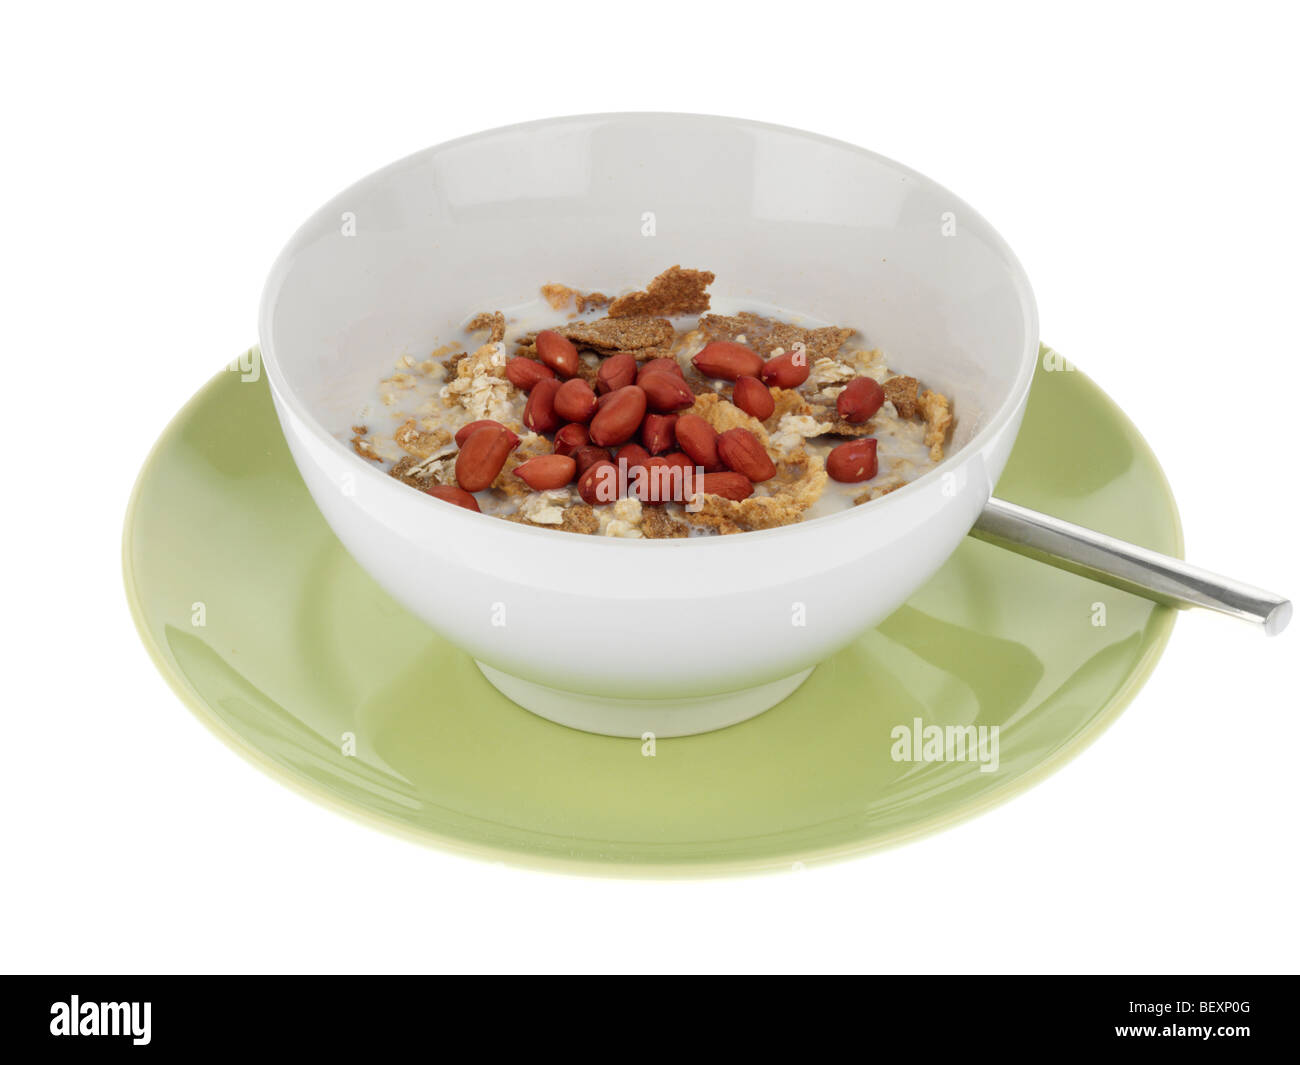 Mixed Cereal with Goji Berries Stock Photo